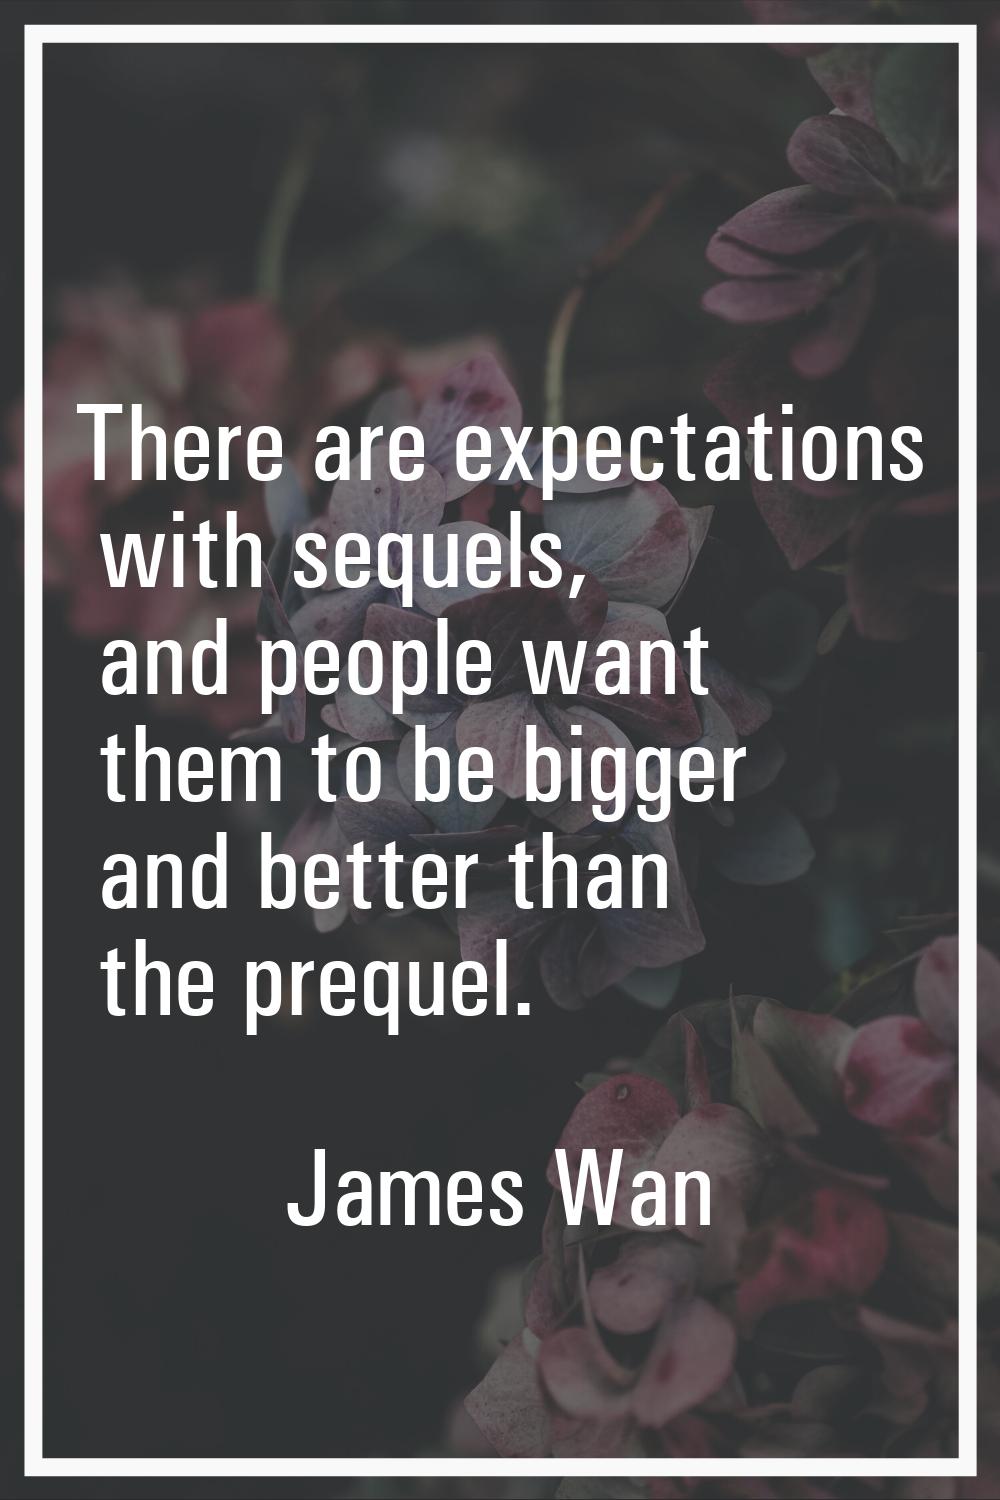 There are expectations with sequels, and people want them to be bigger and better than the prequel.